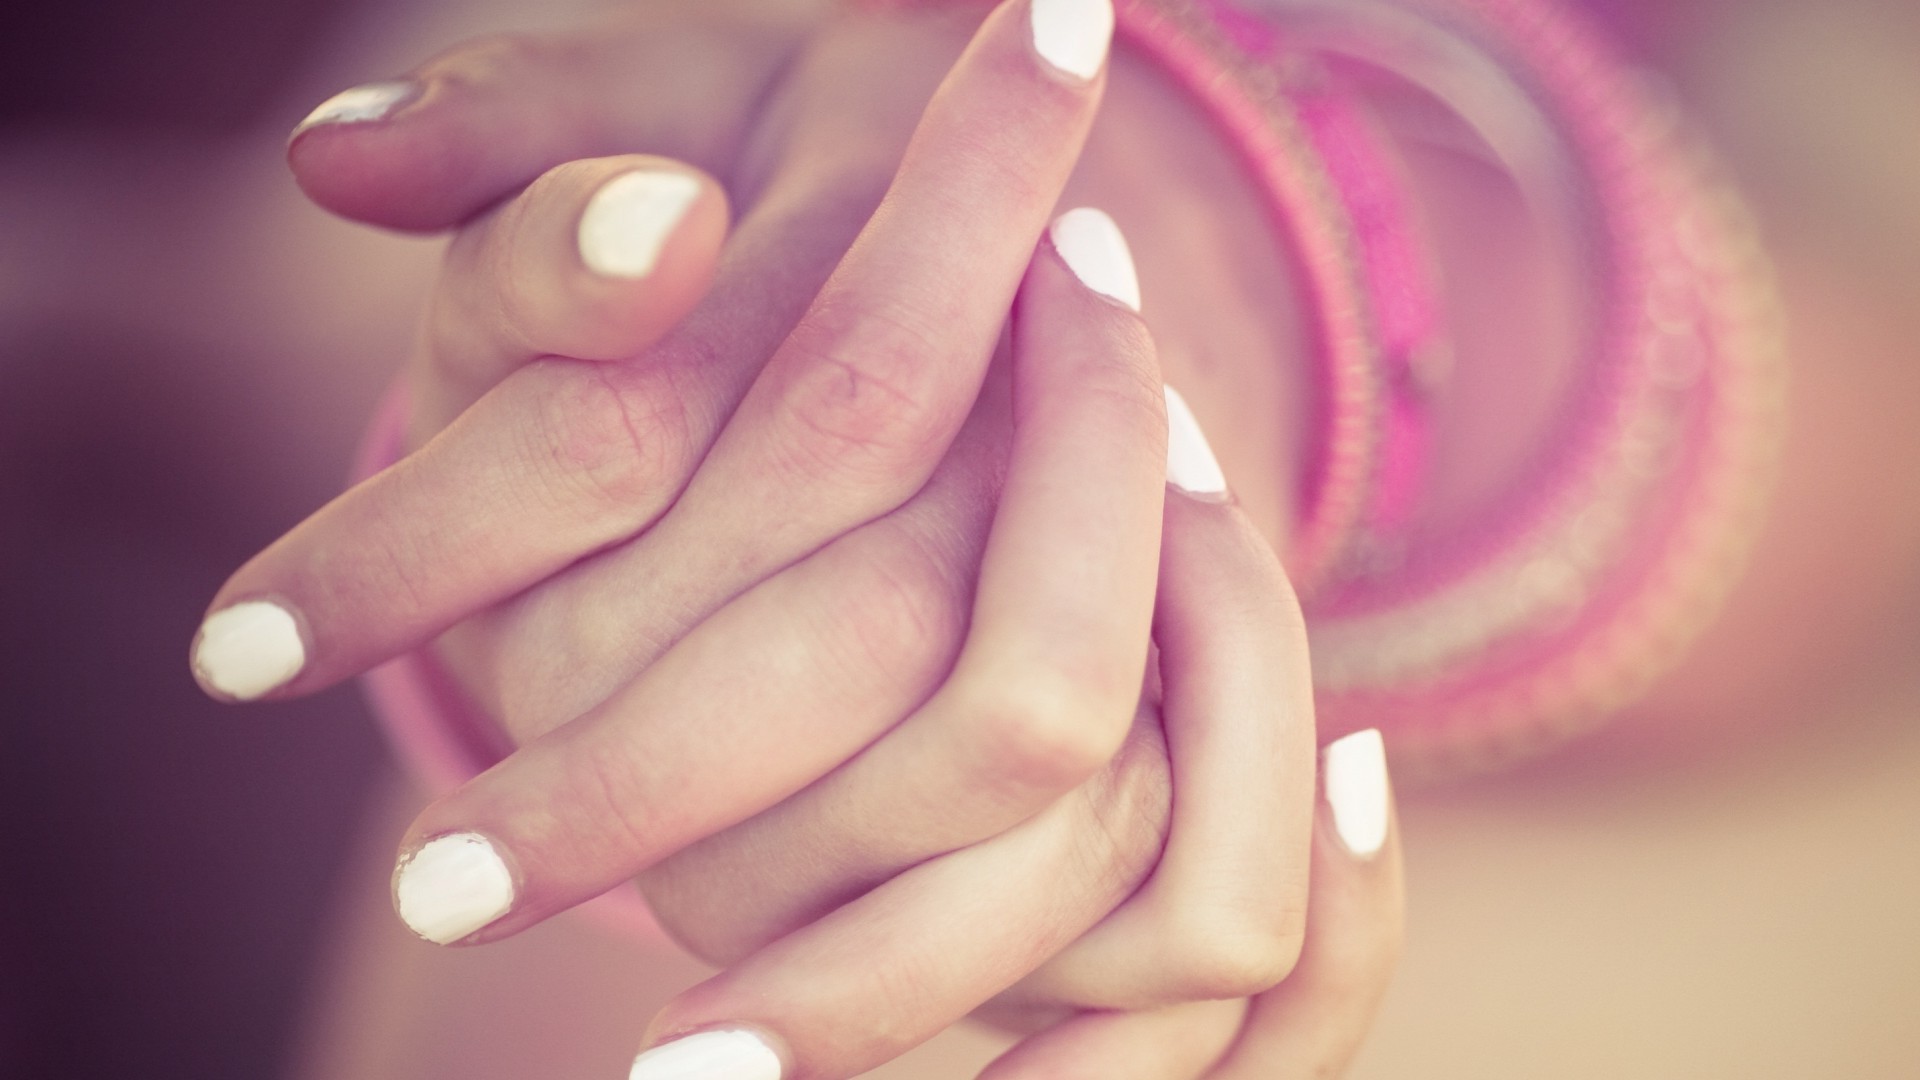 depth Of Field, Hand, Fingers, Painted Nails, Holding Hands Wallpaper